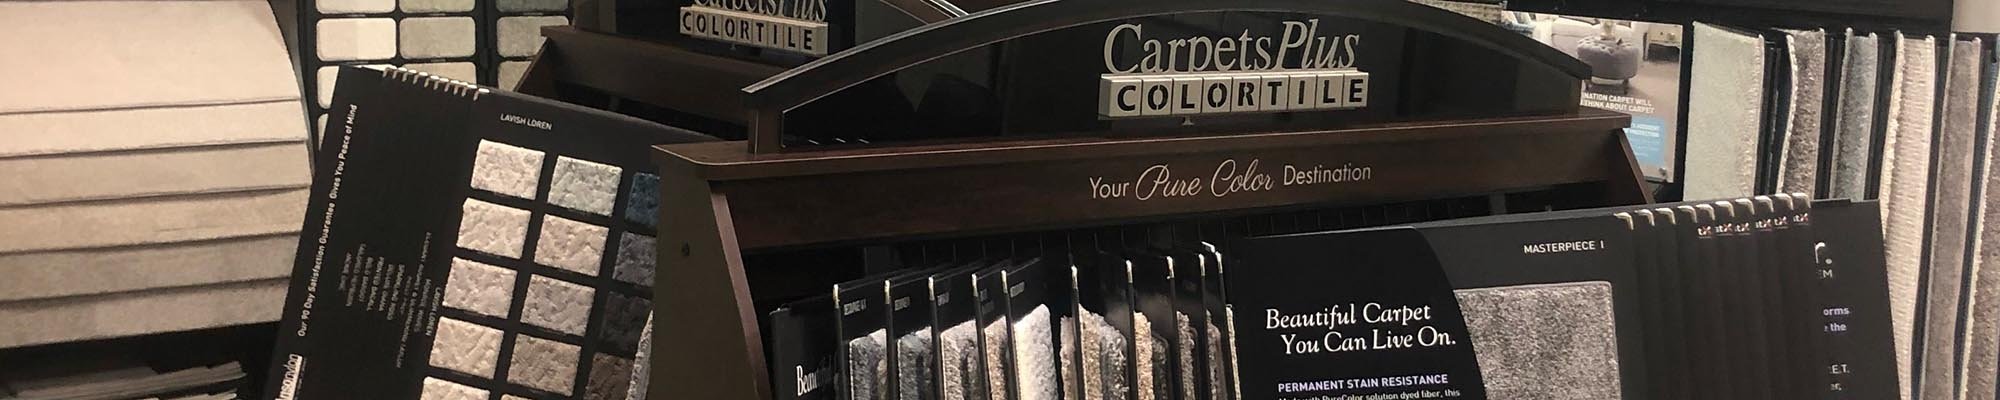 Local Flooring Retailer in Columbia City, IN - Aumsbaugh Flooring CarpetsPlus Colortile providing a wide selection of flooring and expert advice.